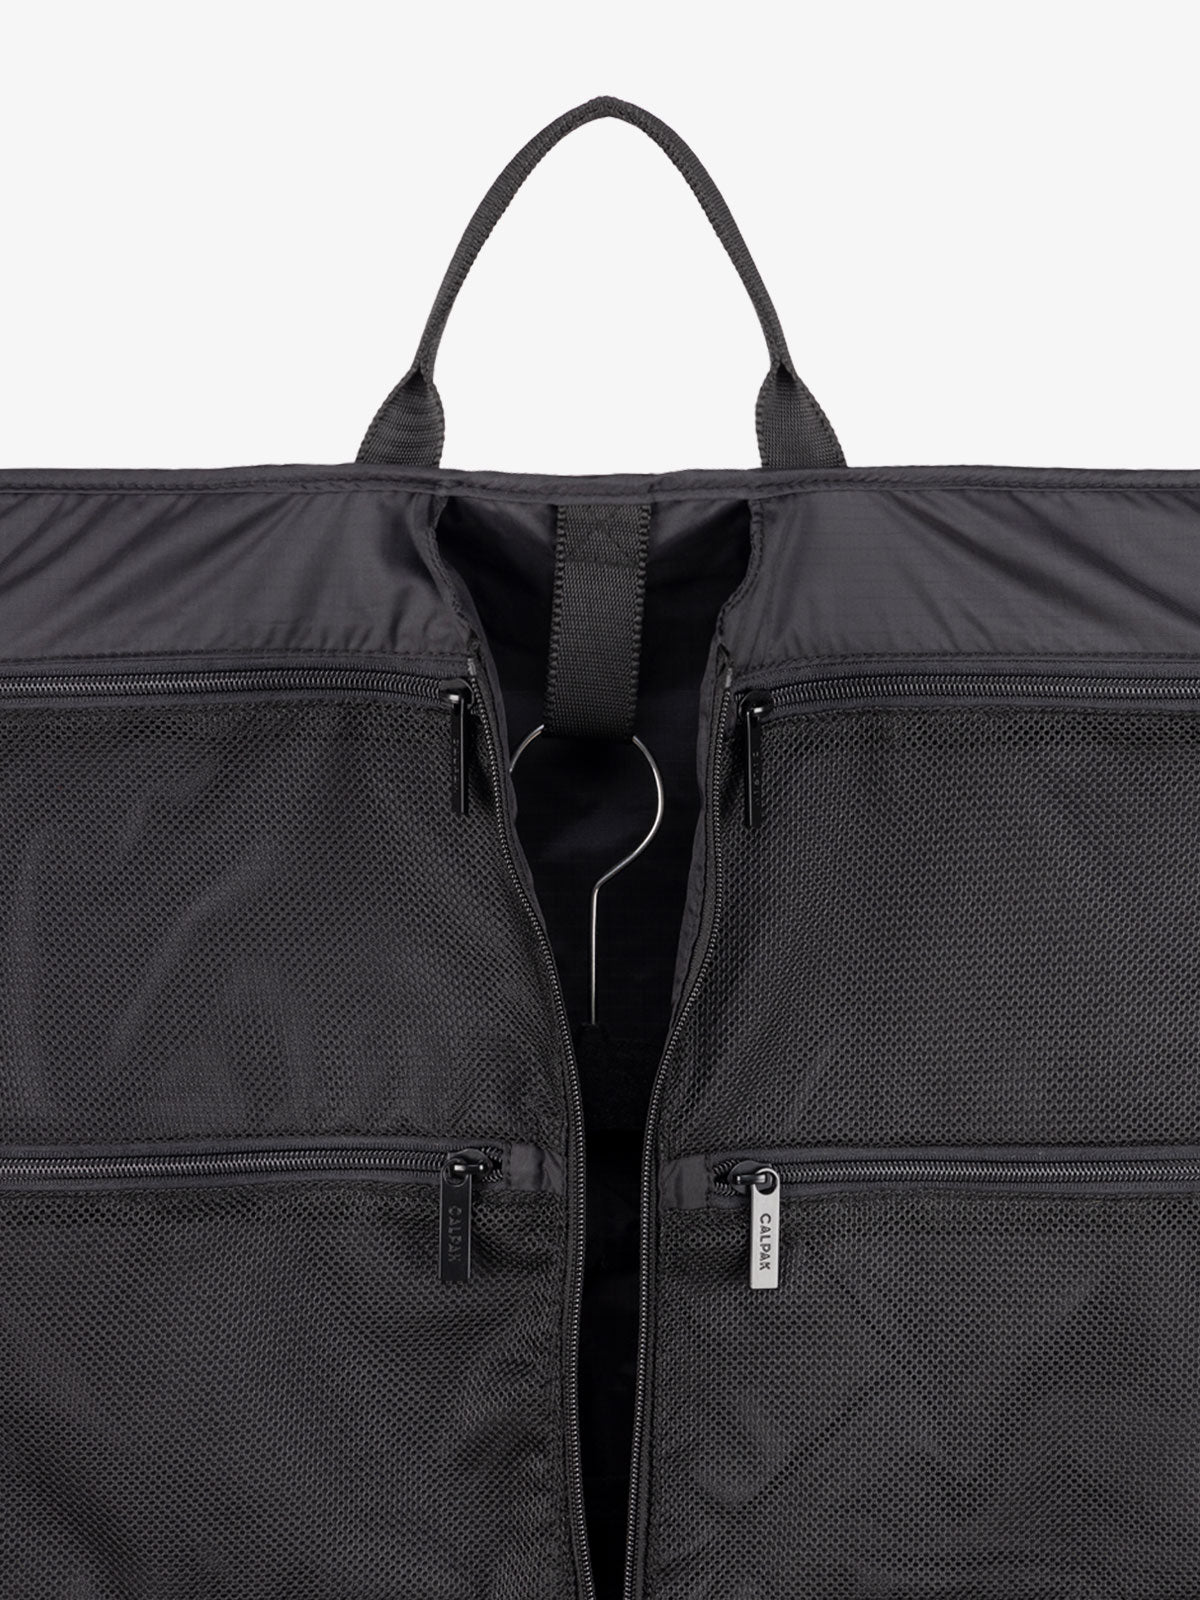 The carry-on garment bag to buy right now